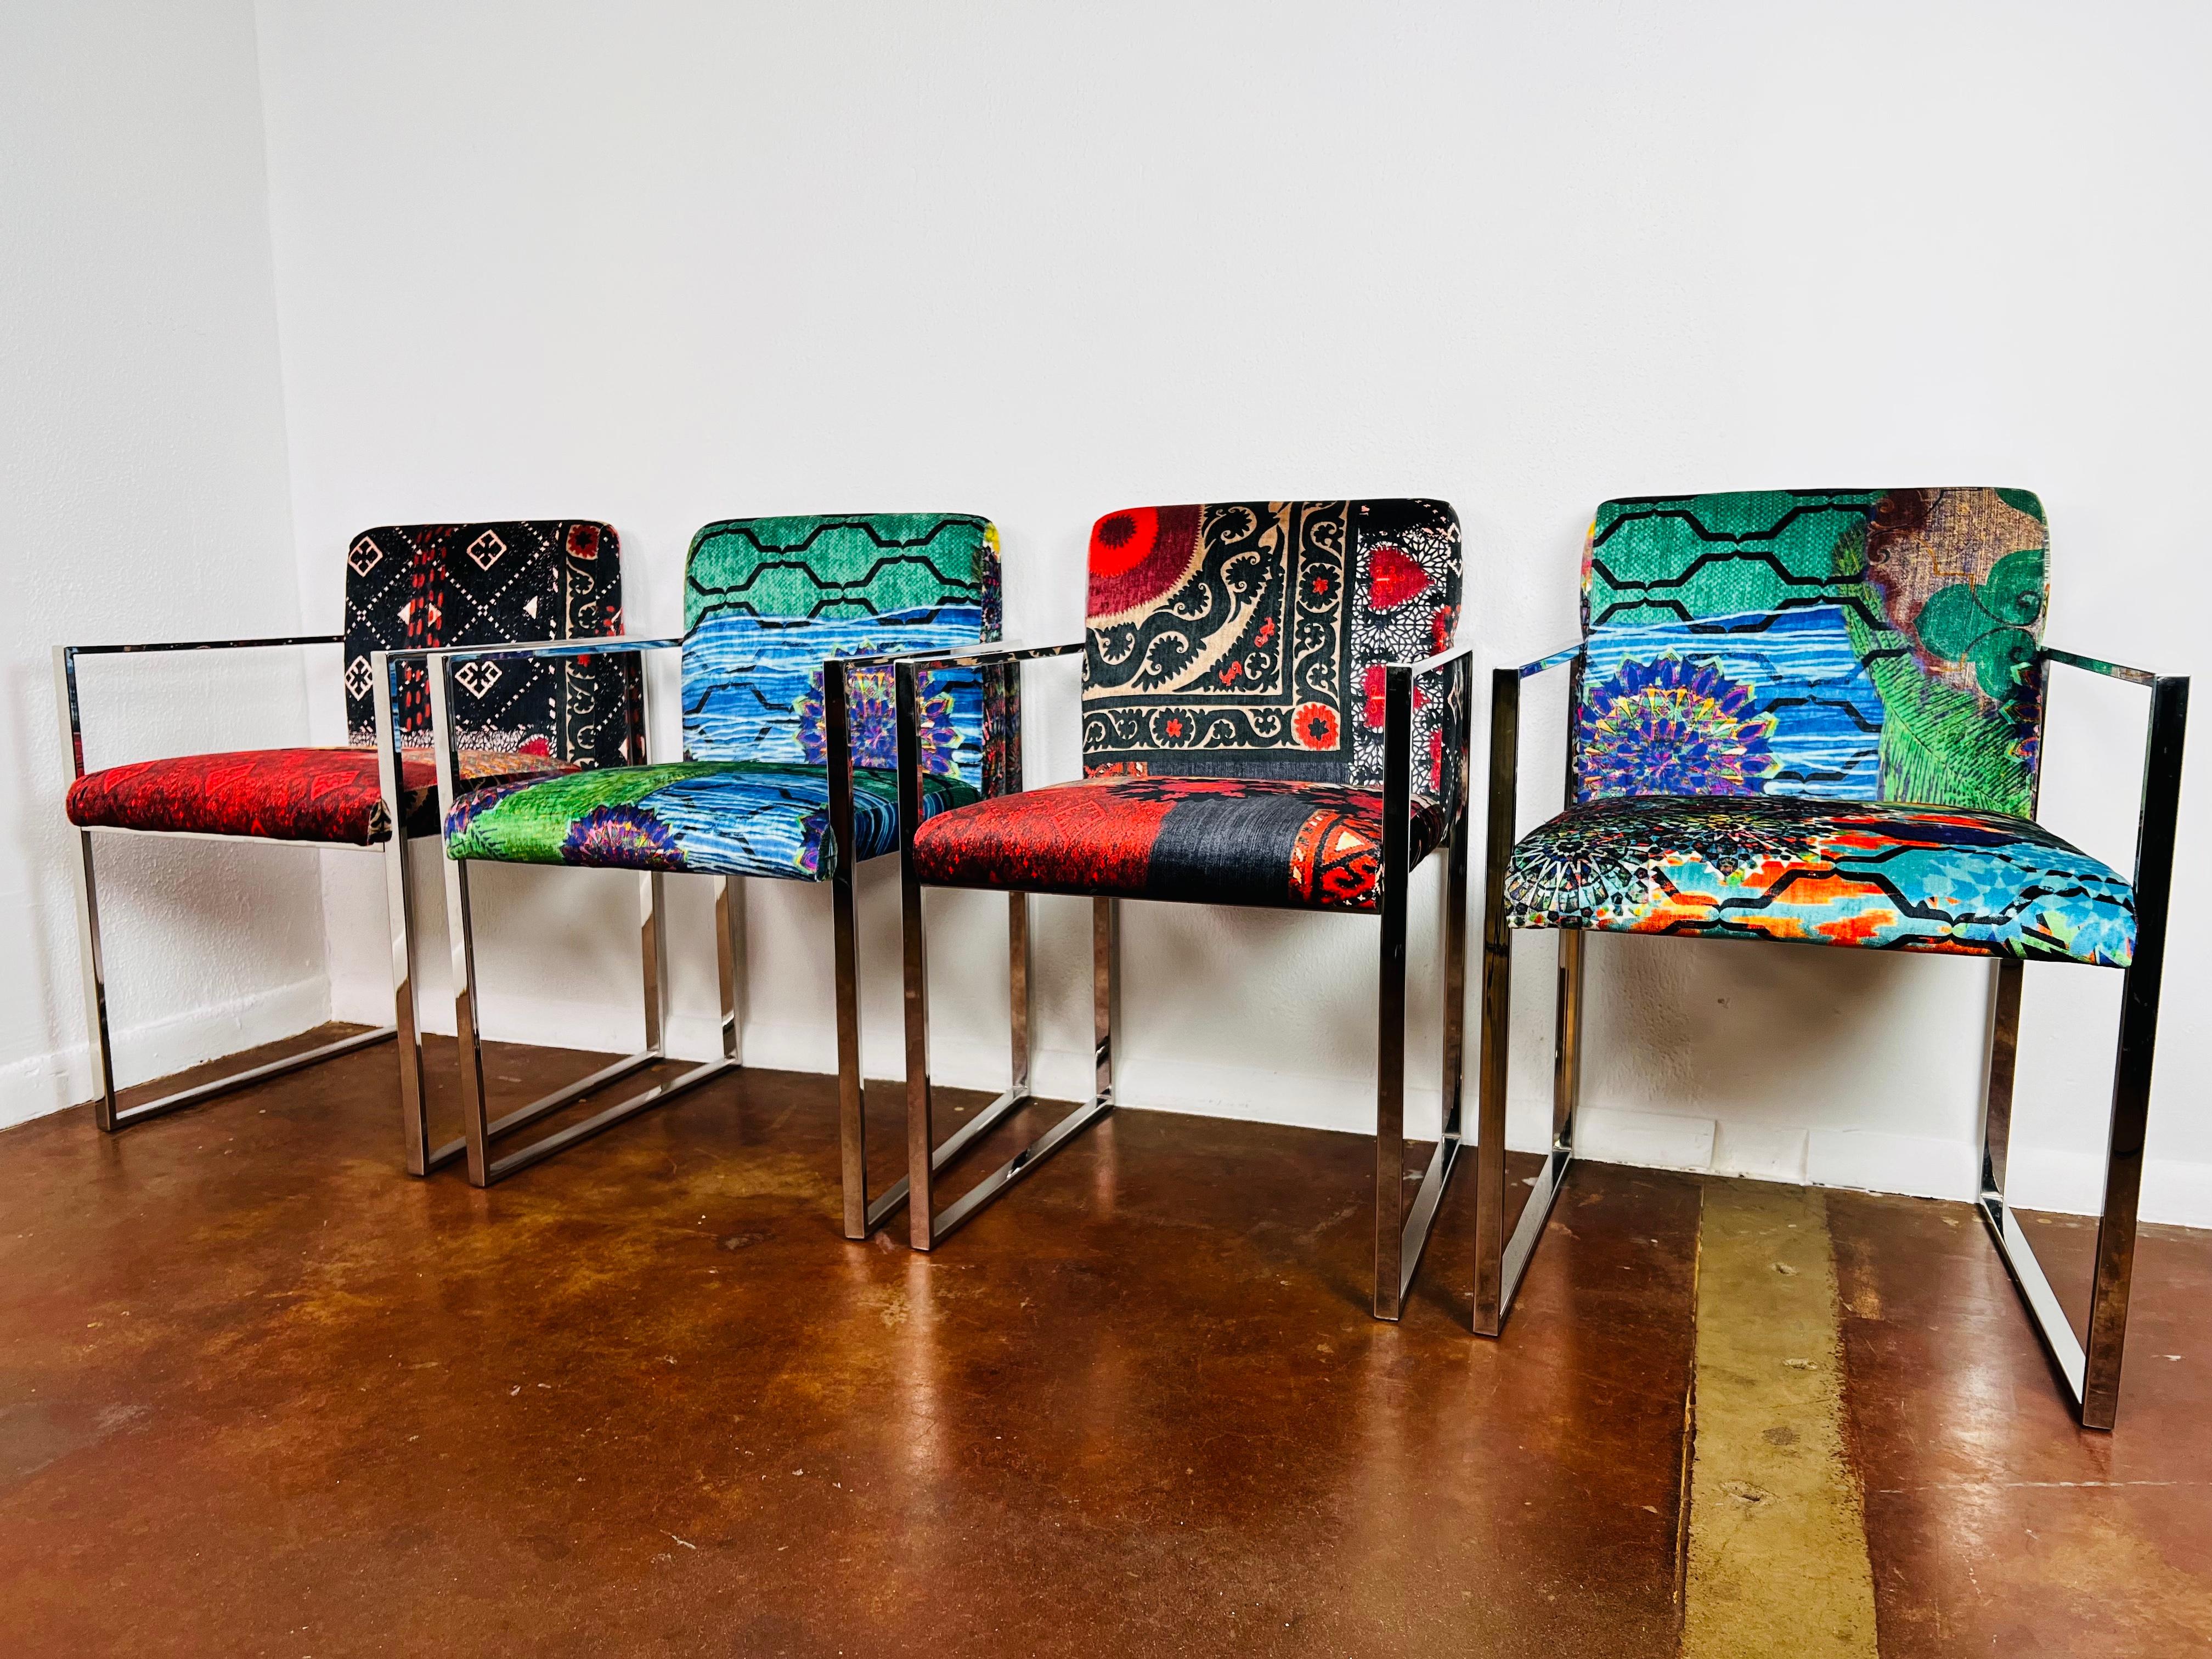 Set of 4 square chrome frame dining chairs in the style of Milo Baughman. Gorgeous bold mismatched upholstery. From Casa Palacio in Mexico City.